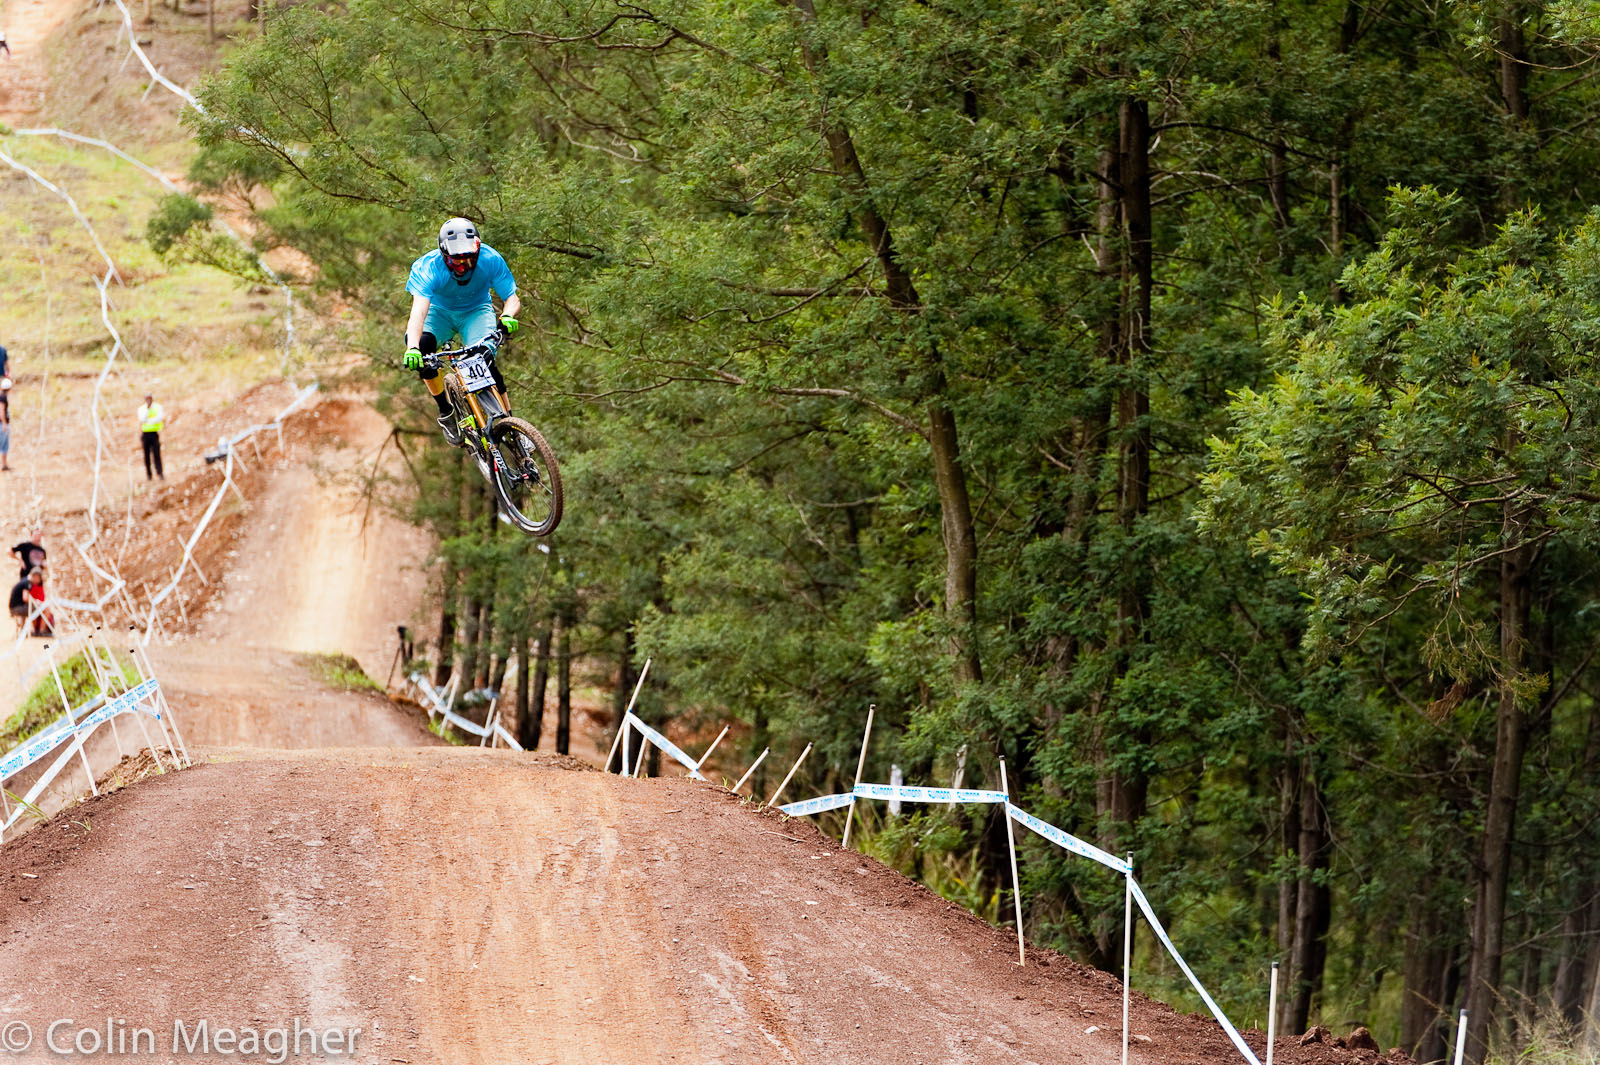 Robin Wallner of Sweden boosting big on the tables at the Pietermaritzburg UCI World Cup DH